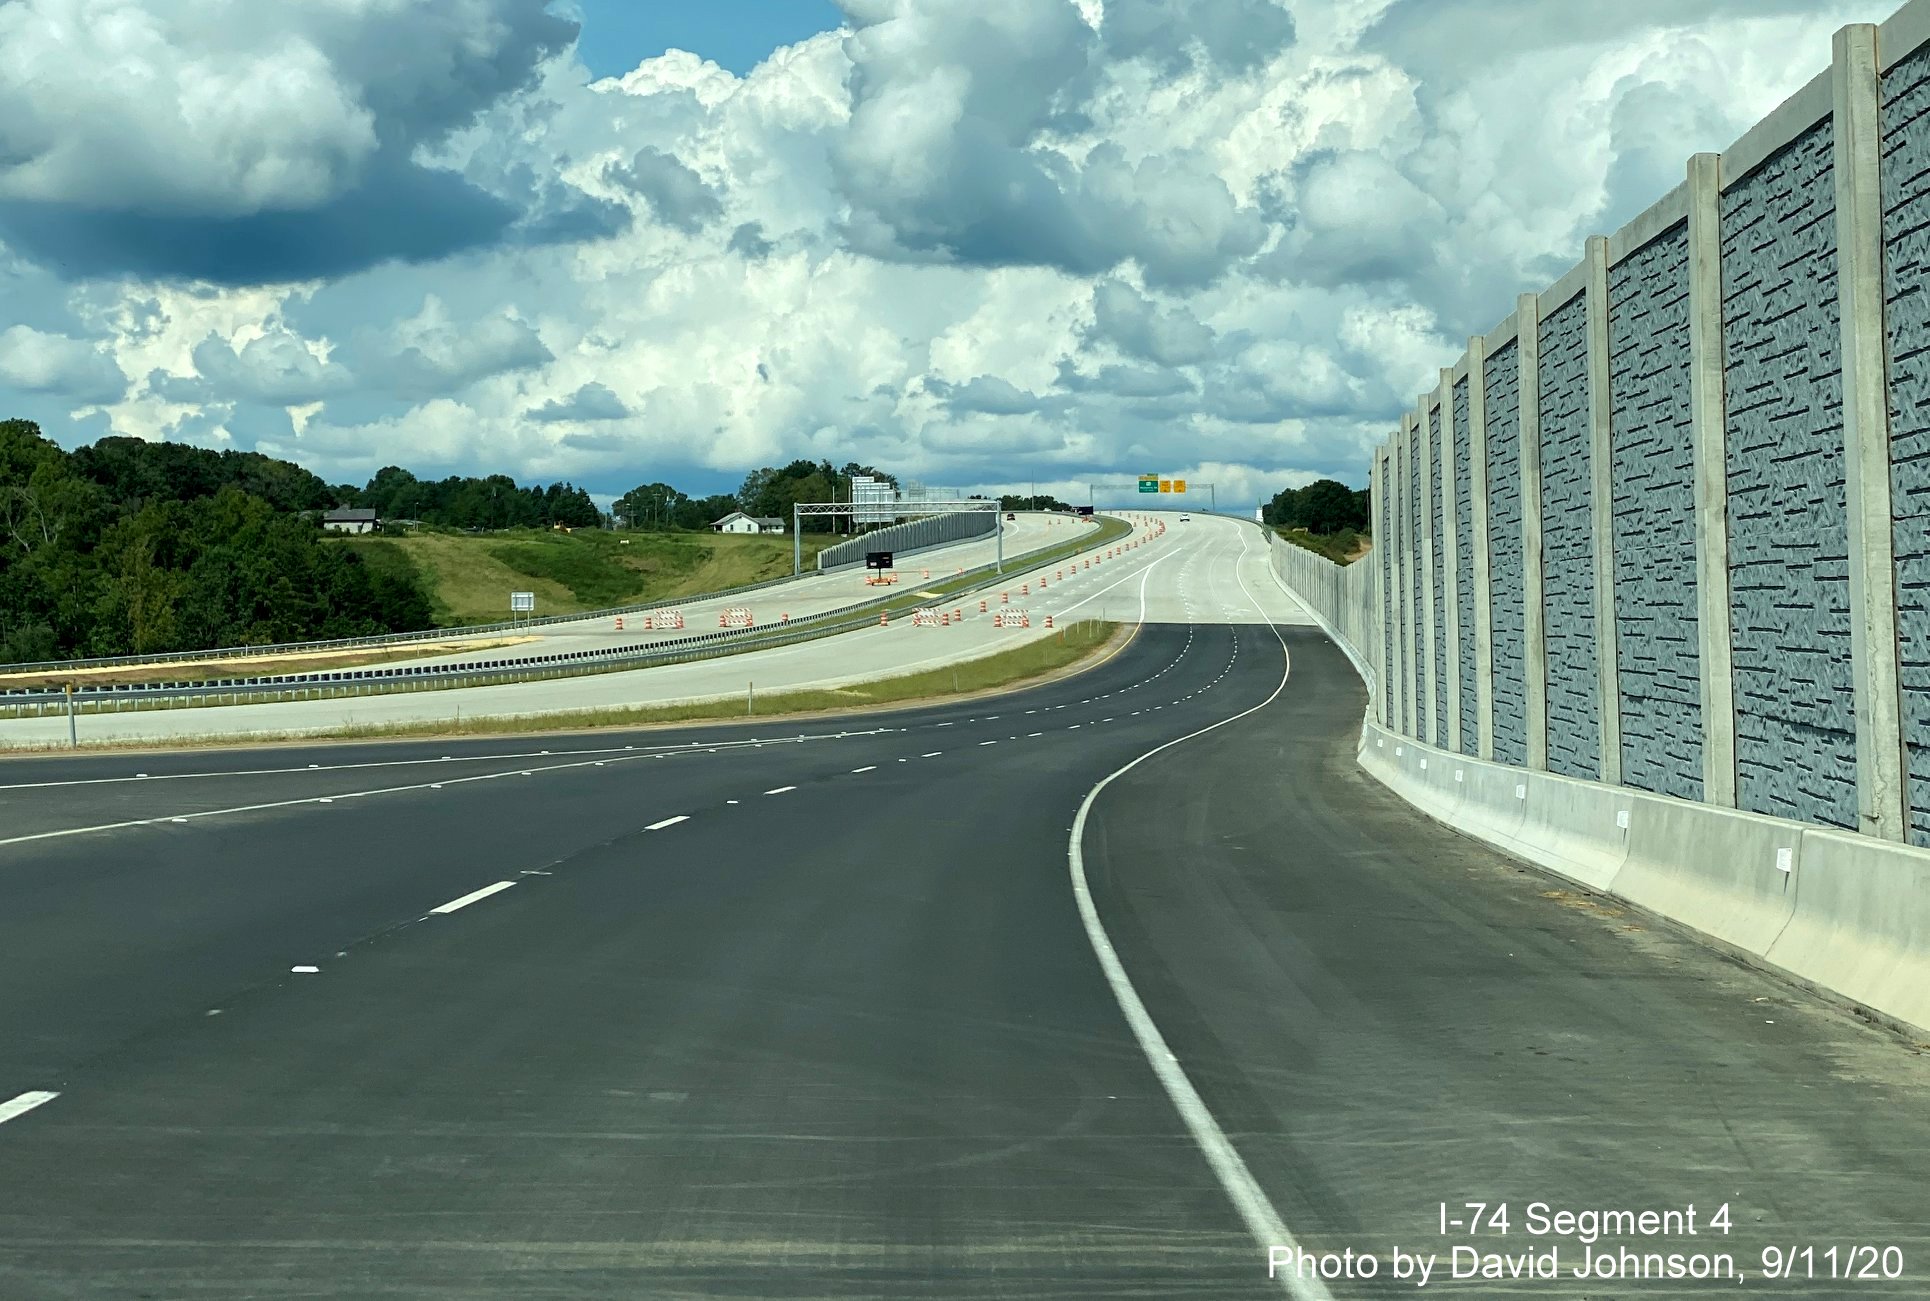 Image of lanes on ramp from US 421 North merging onto newly opened Winston Salem Northern Beltway Lanes, by David Johnson September 2020